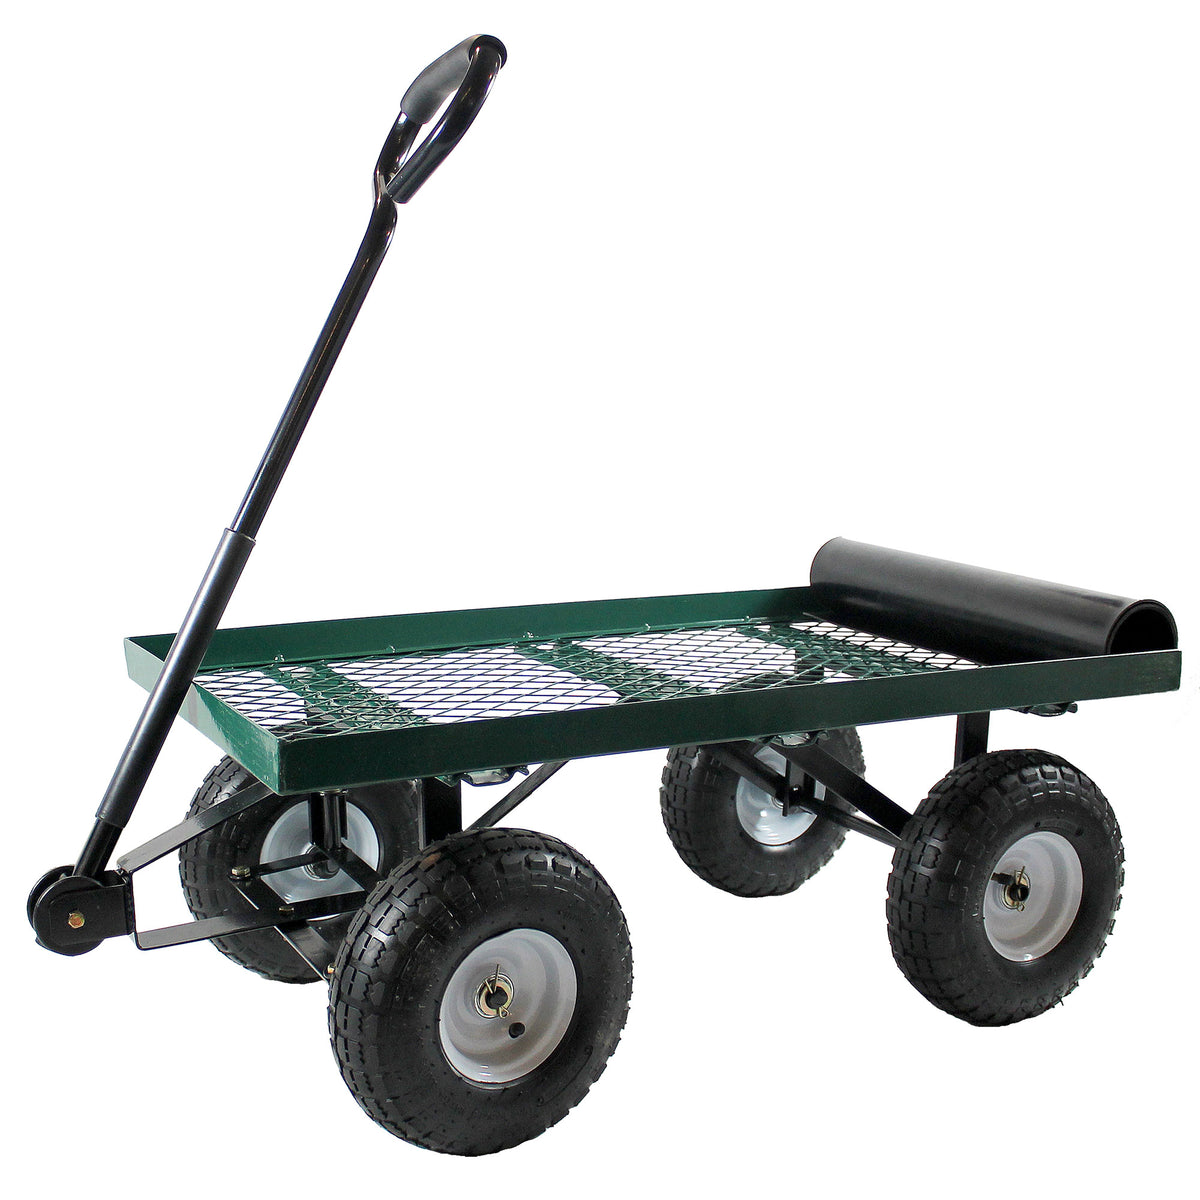 For Folding Garden Wagon Utility Cart Cover Prevent Damage from